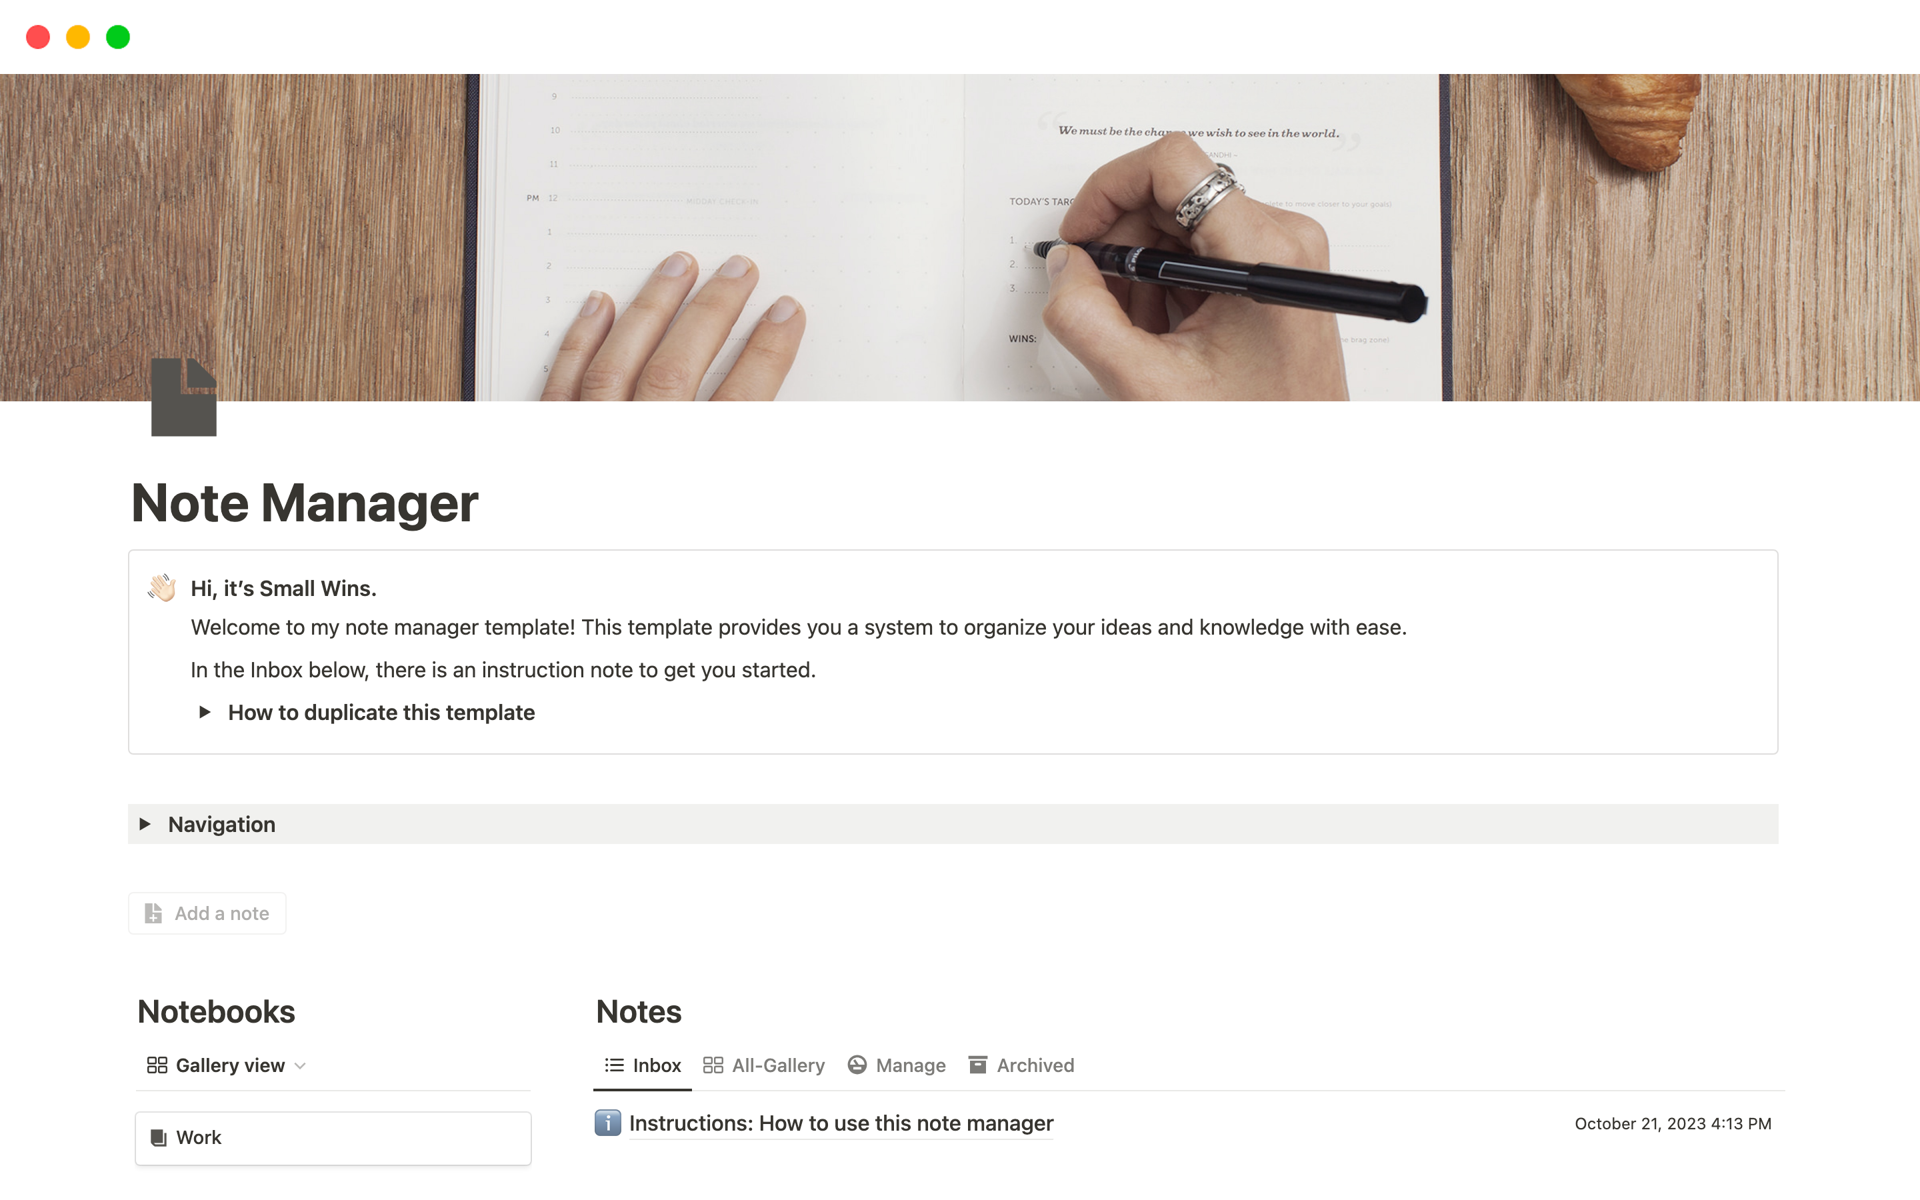 The note manager template provides you a system to organize your ideas and knowledge with ease.